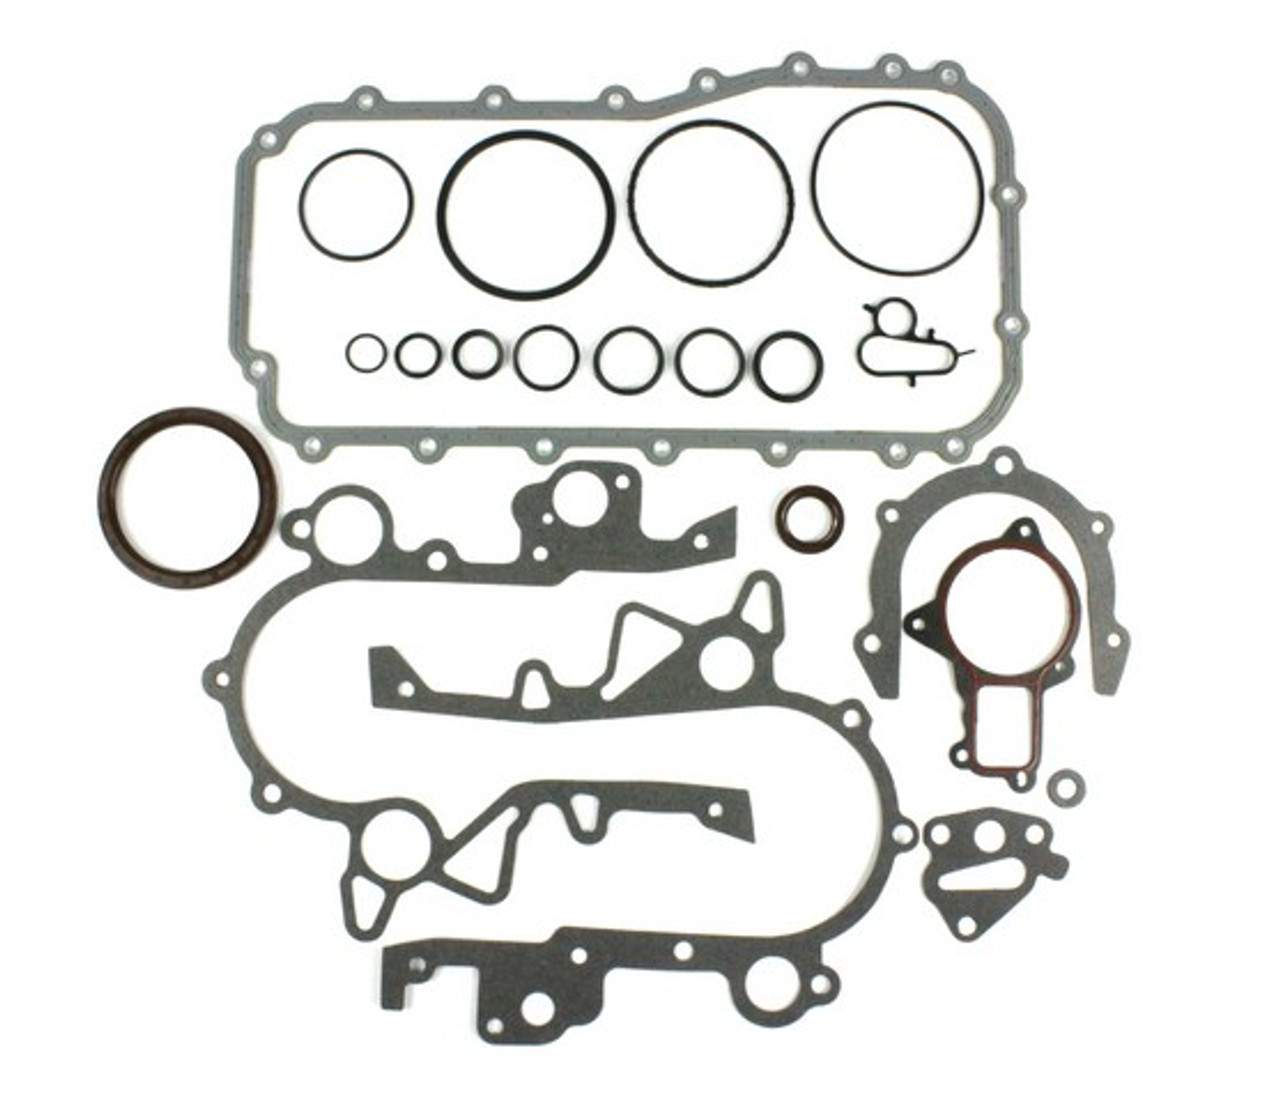 Lower Gasket Set 3.3L 1990 Chrysler Town & Country - LGS1135.31